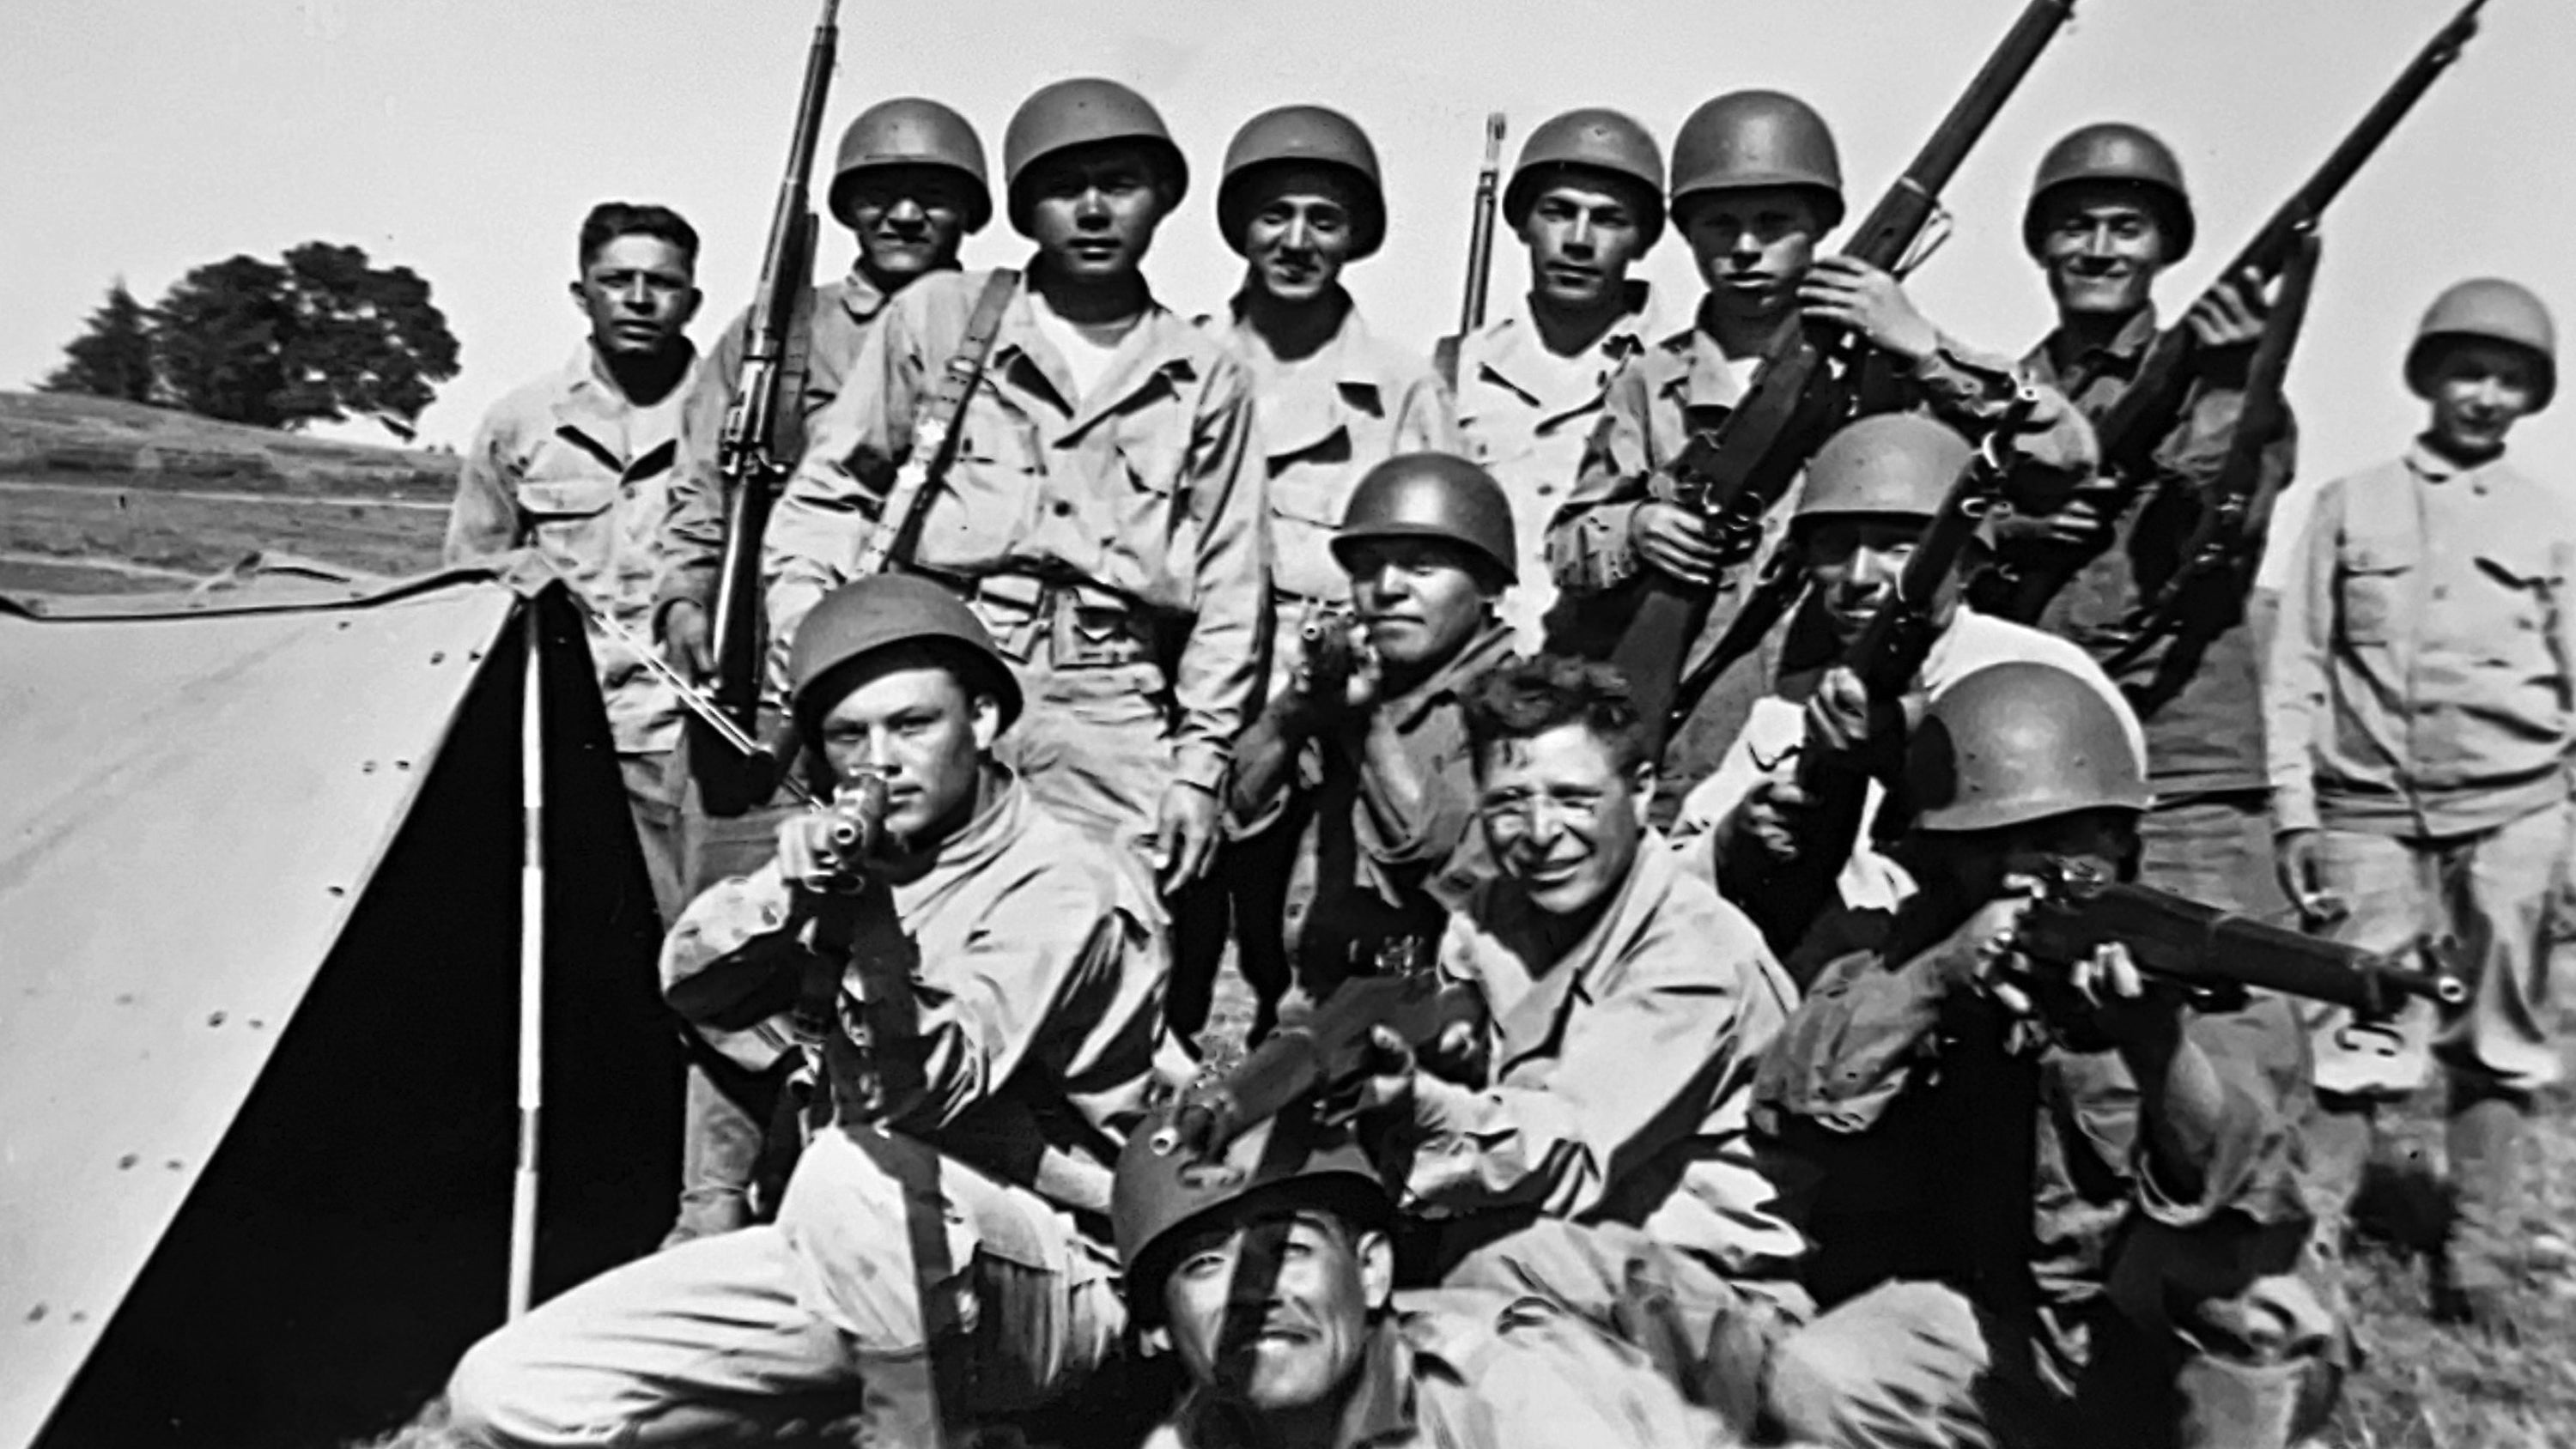 Brothers in Arms: Chinese American Soldiers Fought Heroically in WWII | AUSA